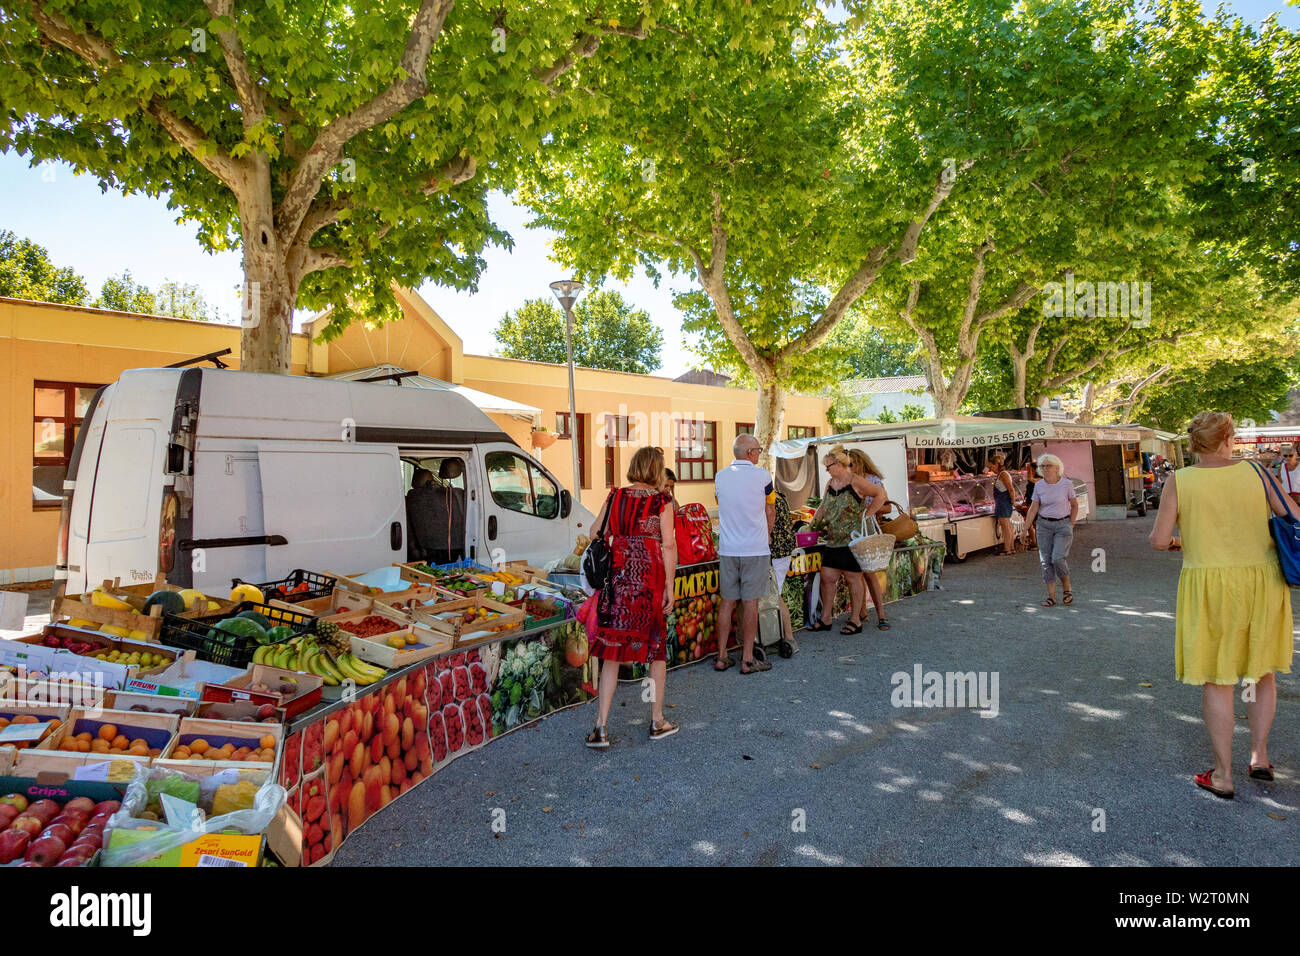 View of an old traditional village market Stock Photo - Alamy